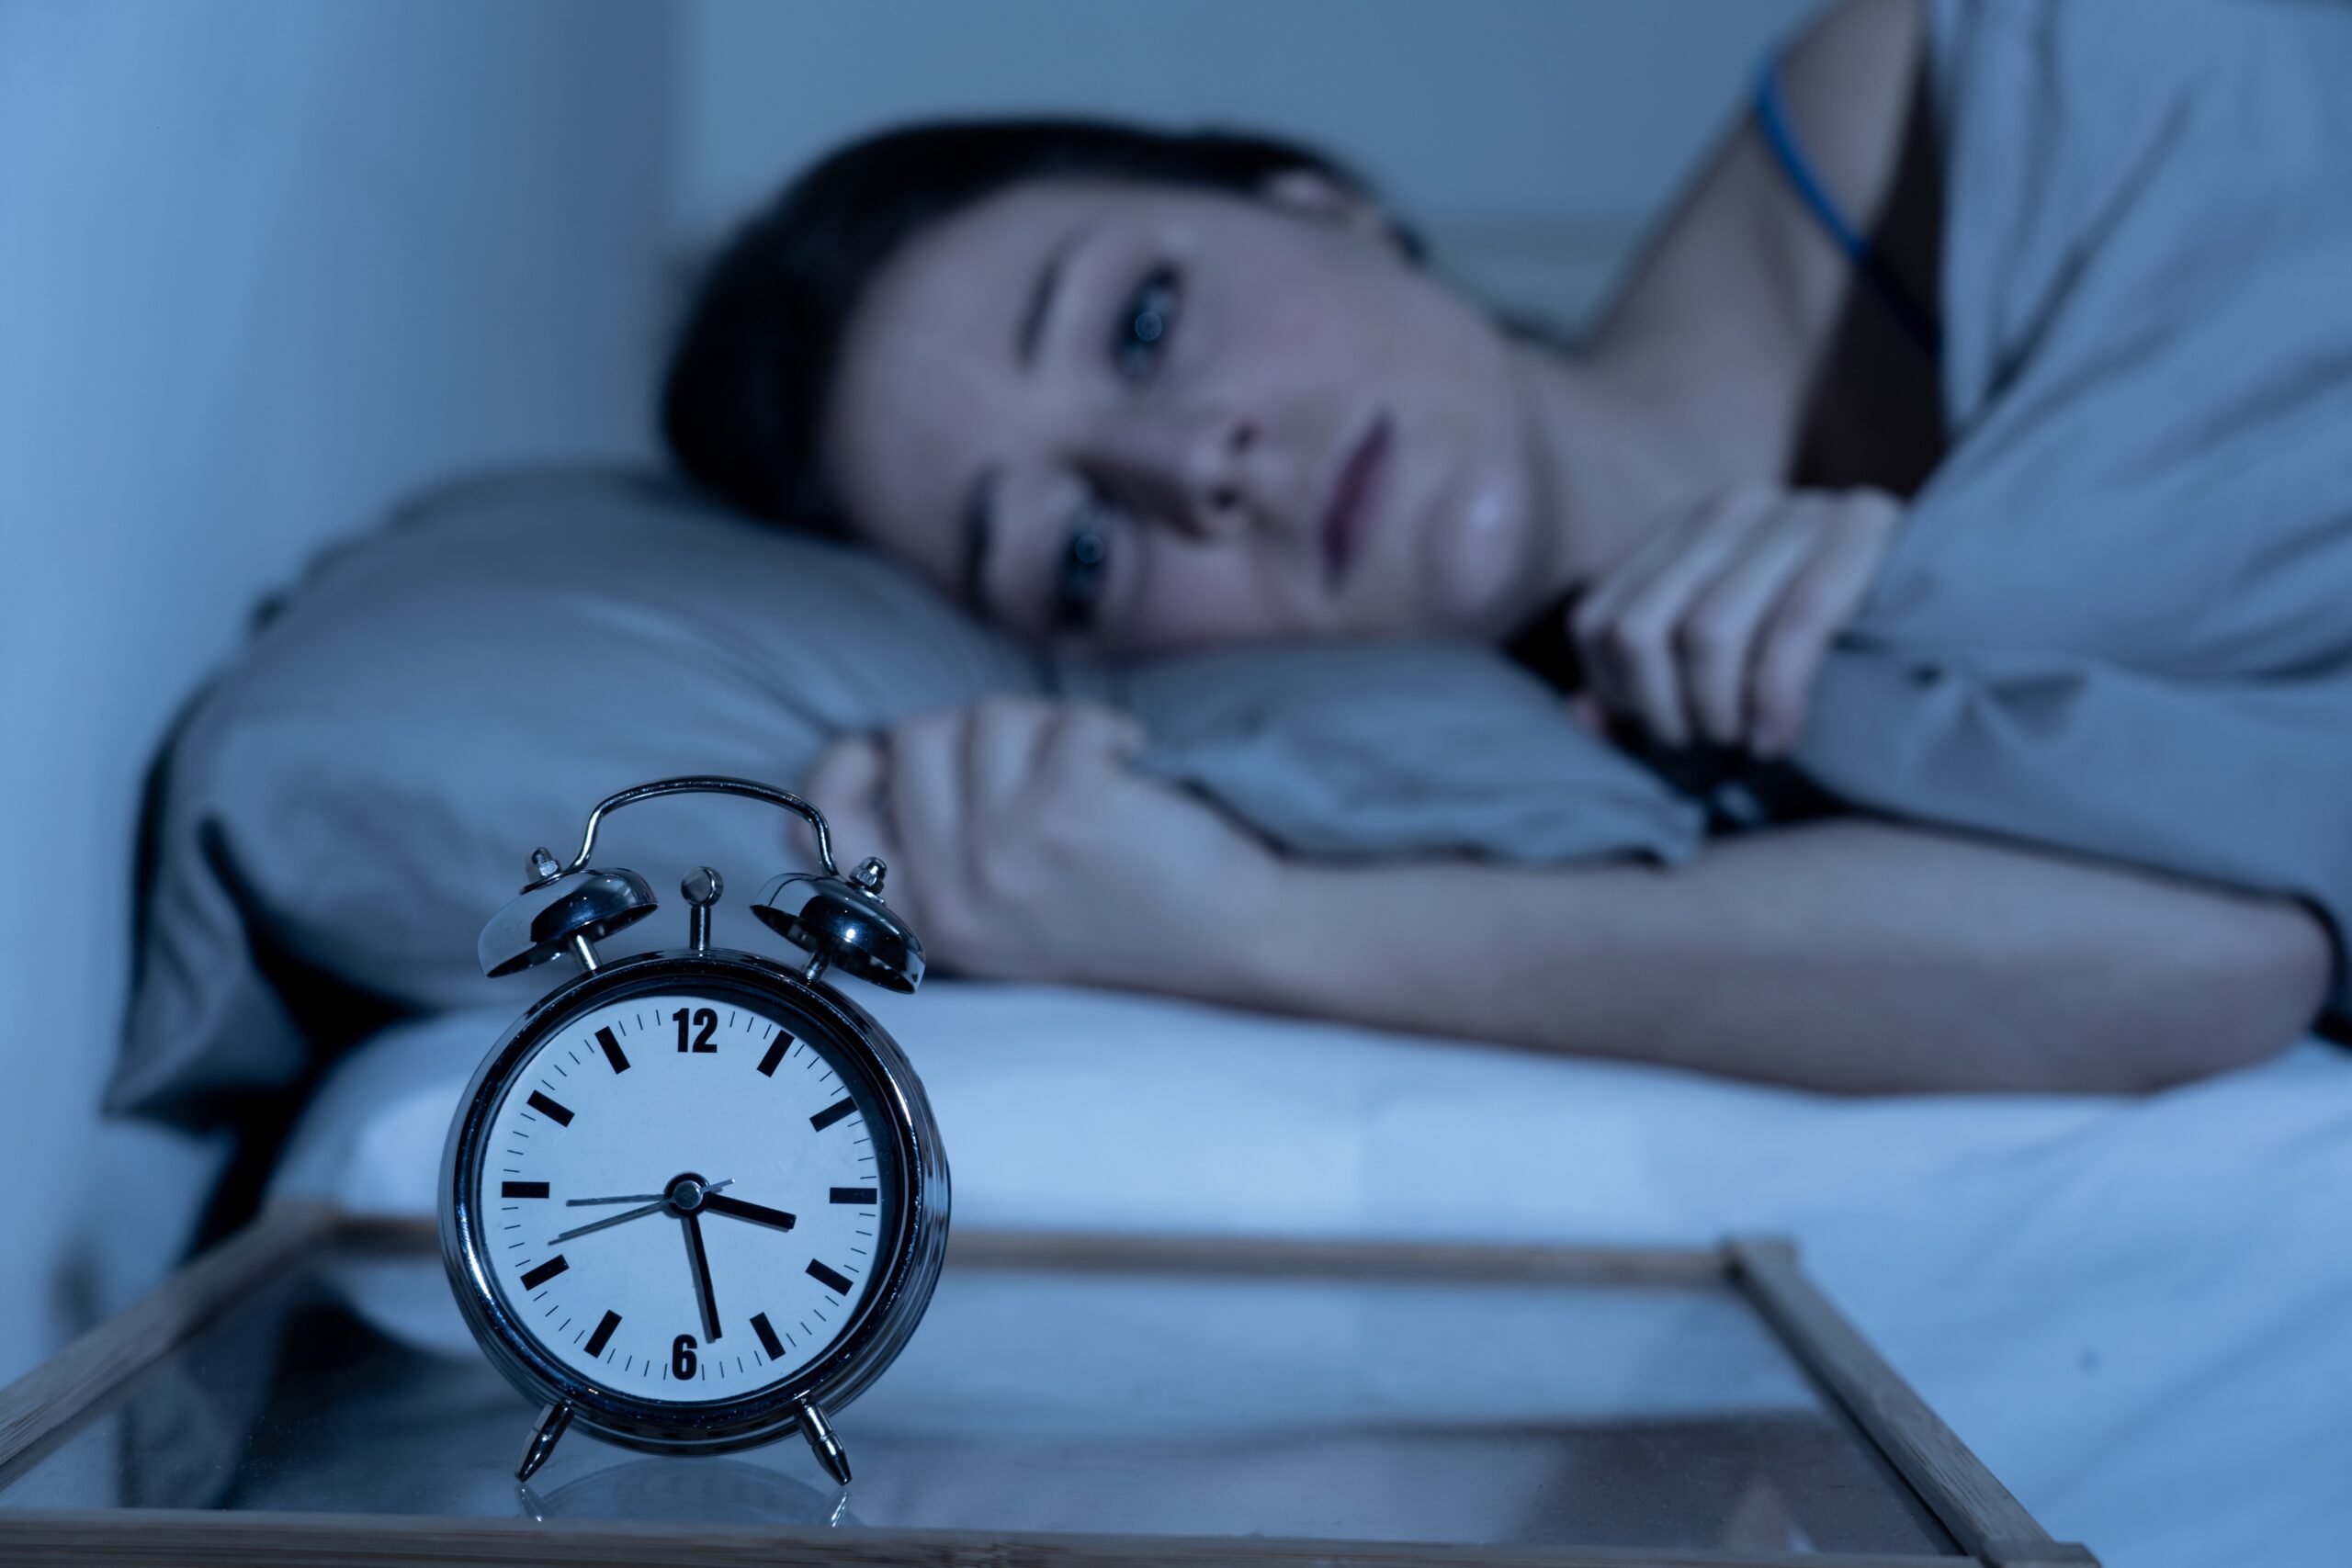 Risk of stroke due to poor sleep – a healthy diet counteracts it